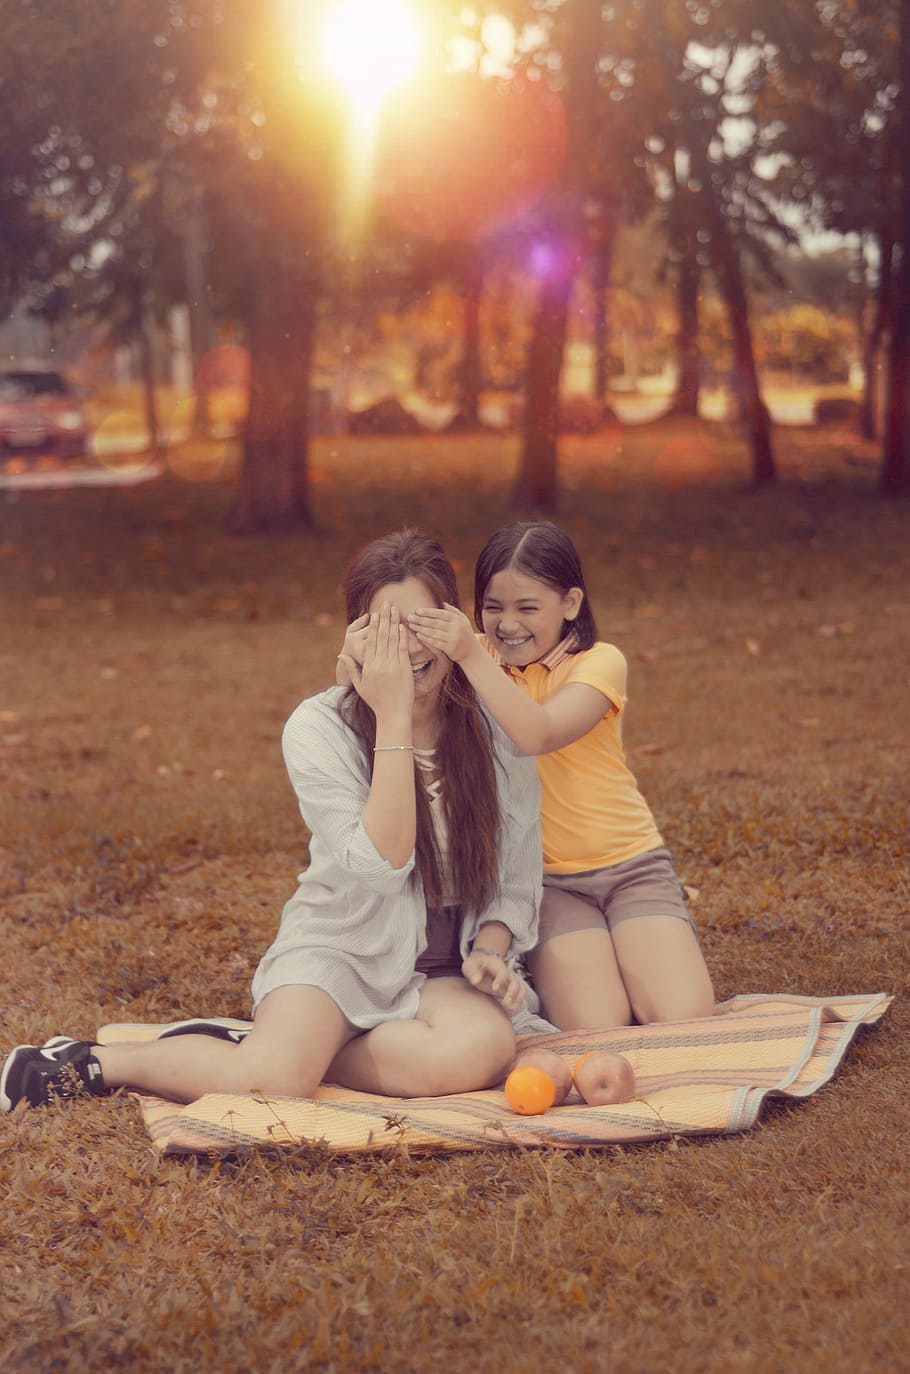 Two Women Sitting on Brown Picnic Mat during Sunset, adolescence